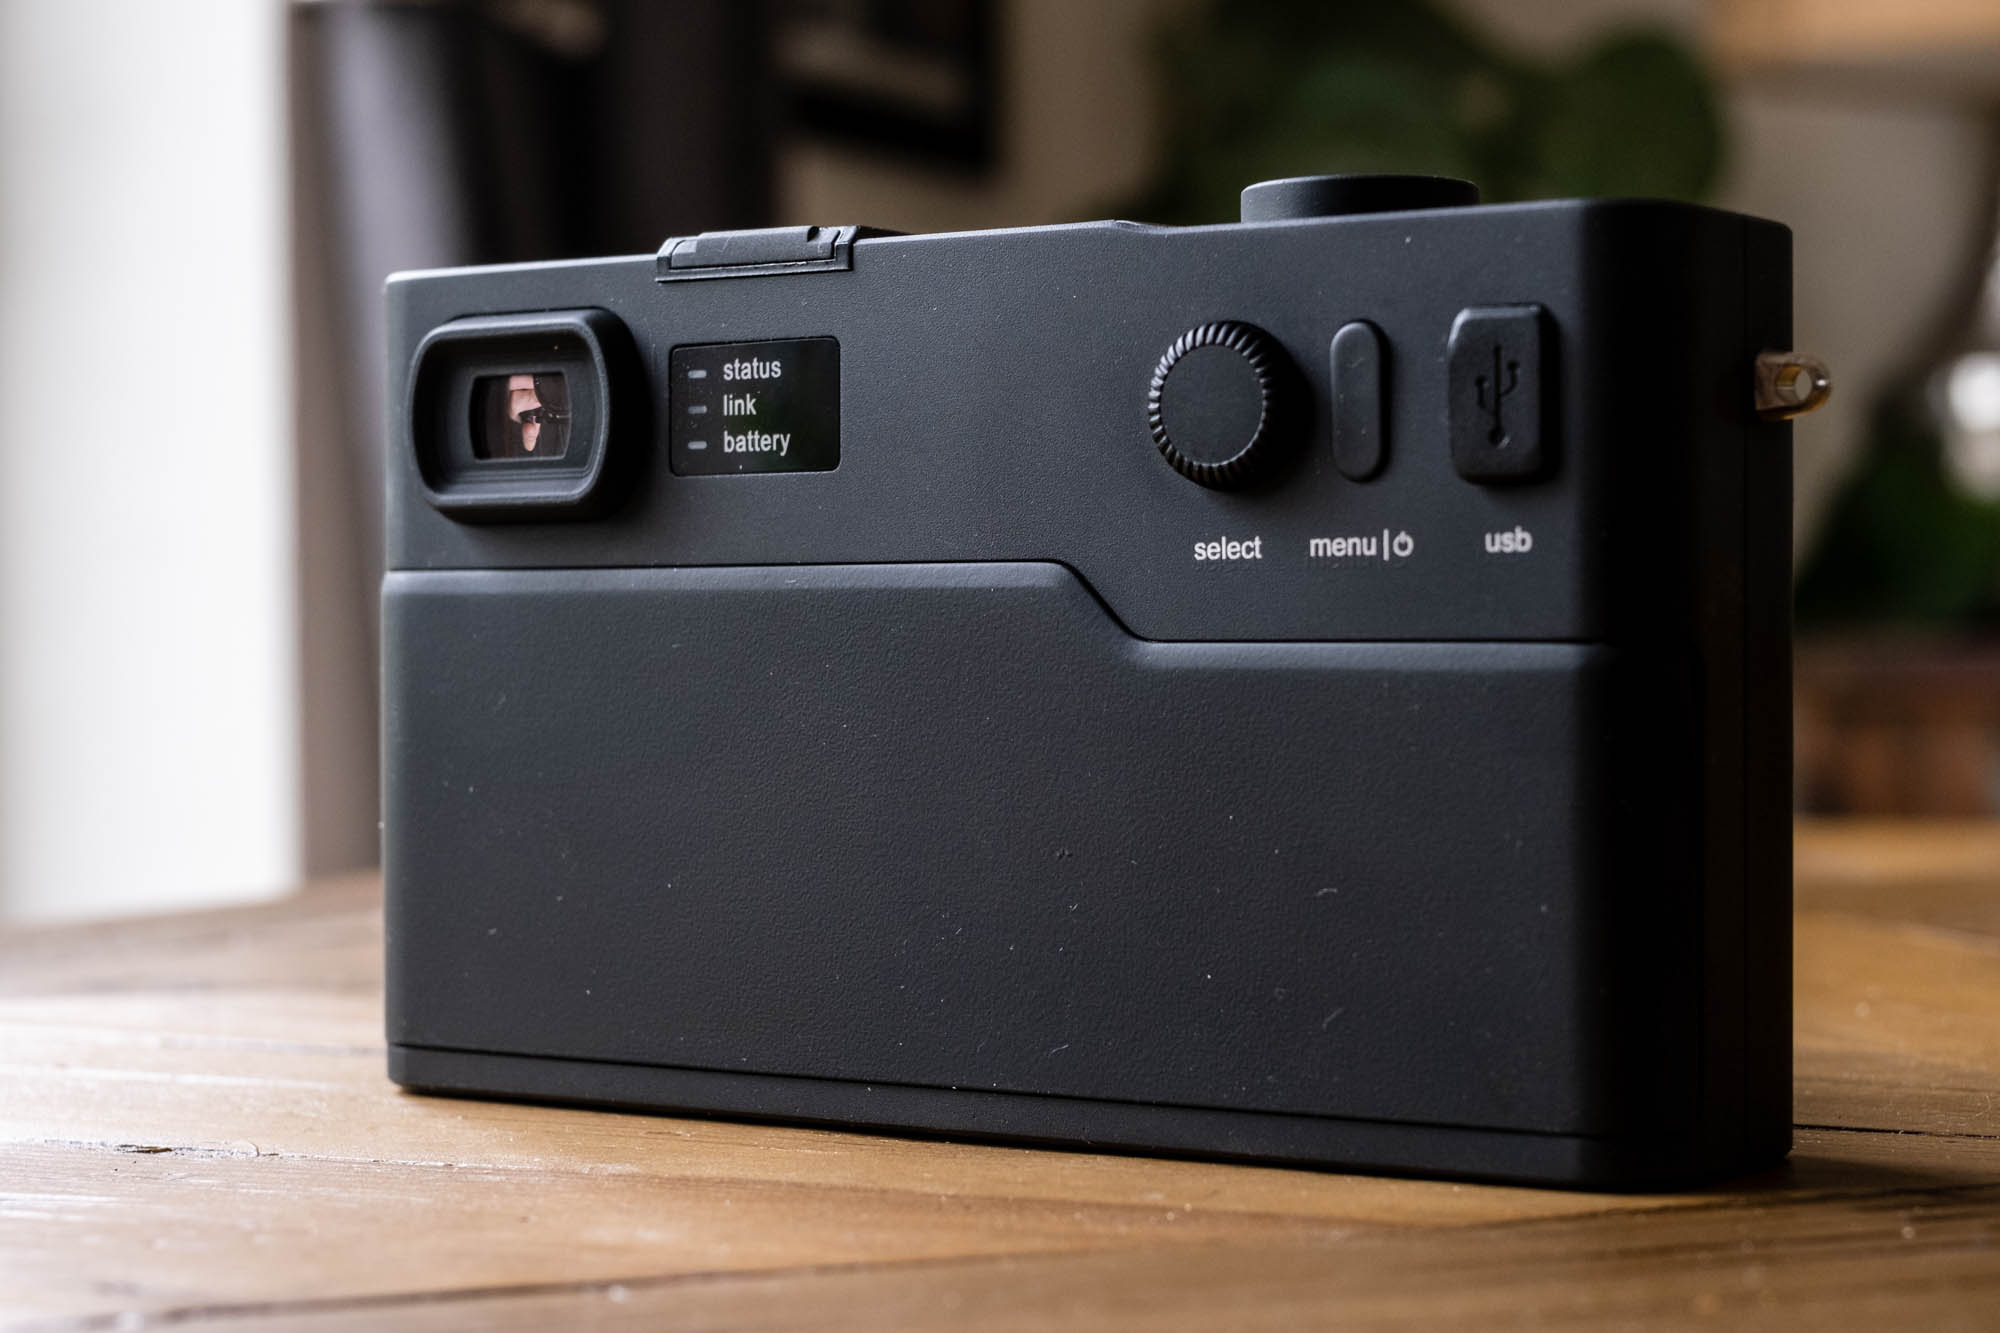 Somber Ongehoorzaamheid Rook First real-world preview of the upcoming PIXII APS-C rangefinder with Leica  M-mount is out - Leica Rumors